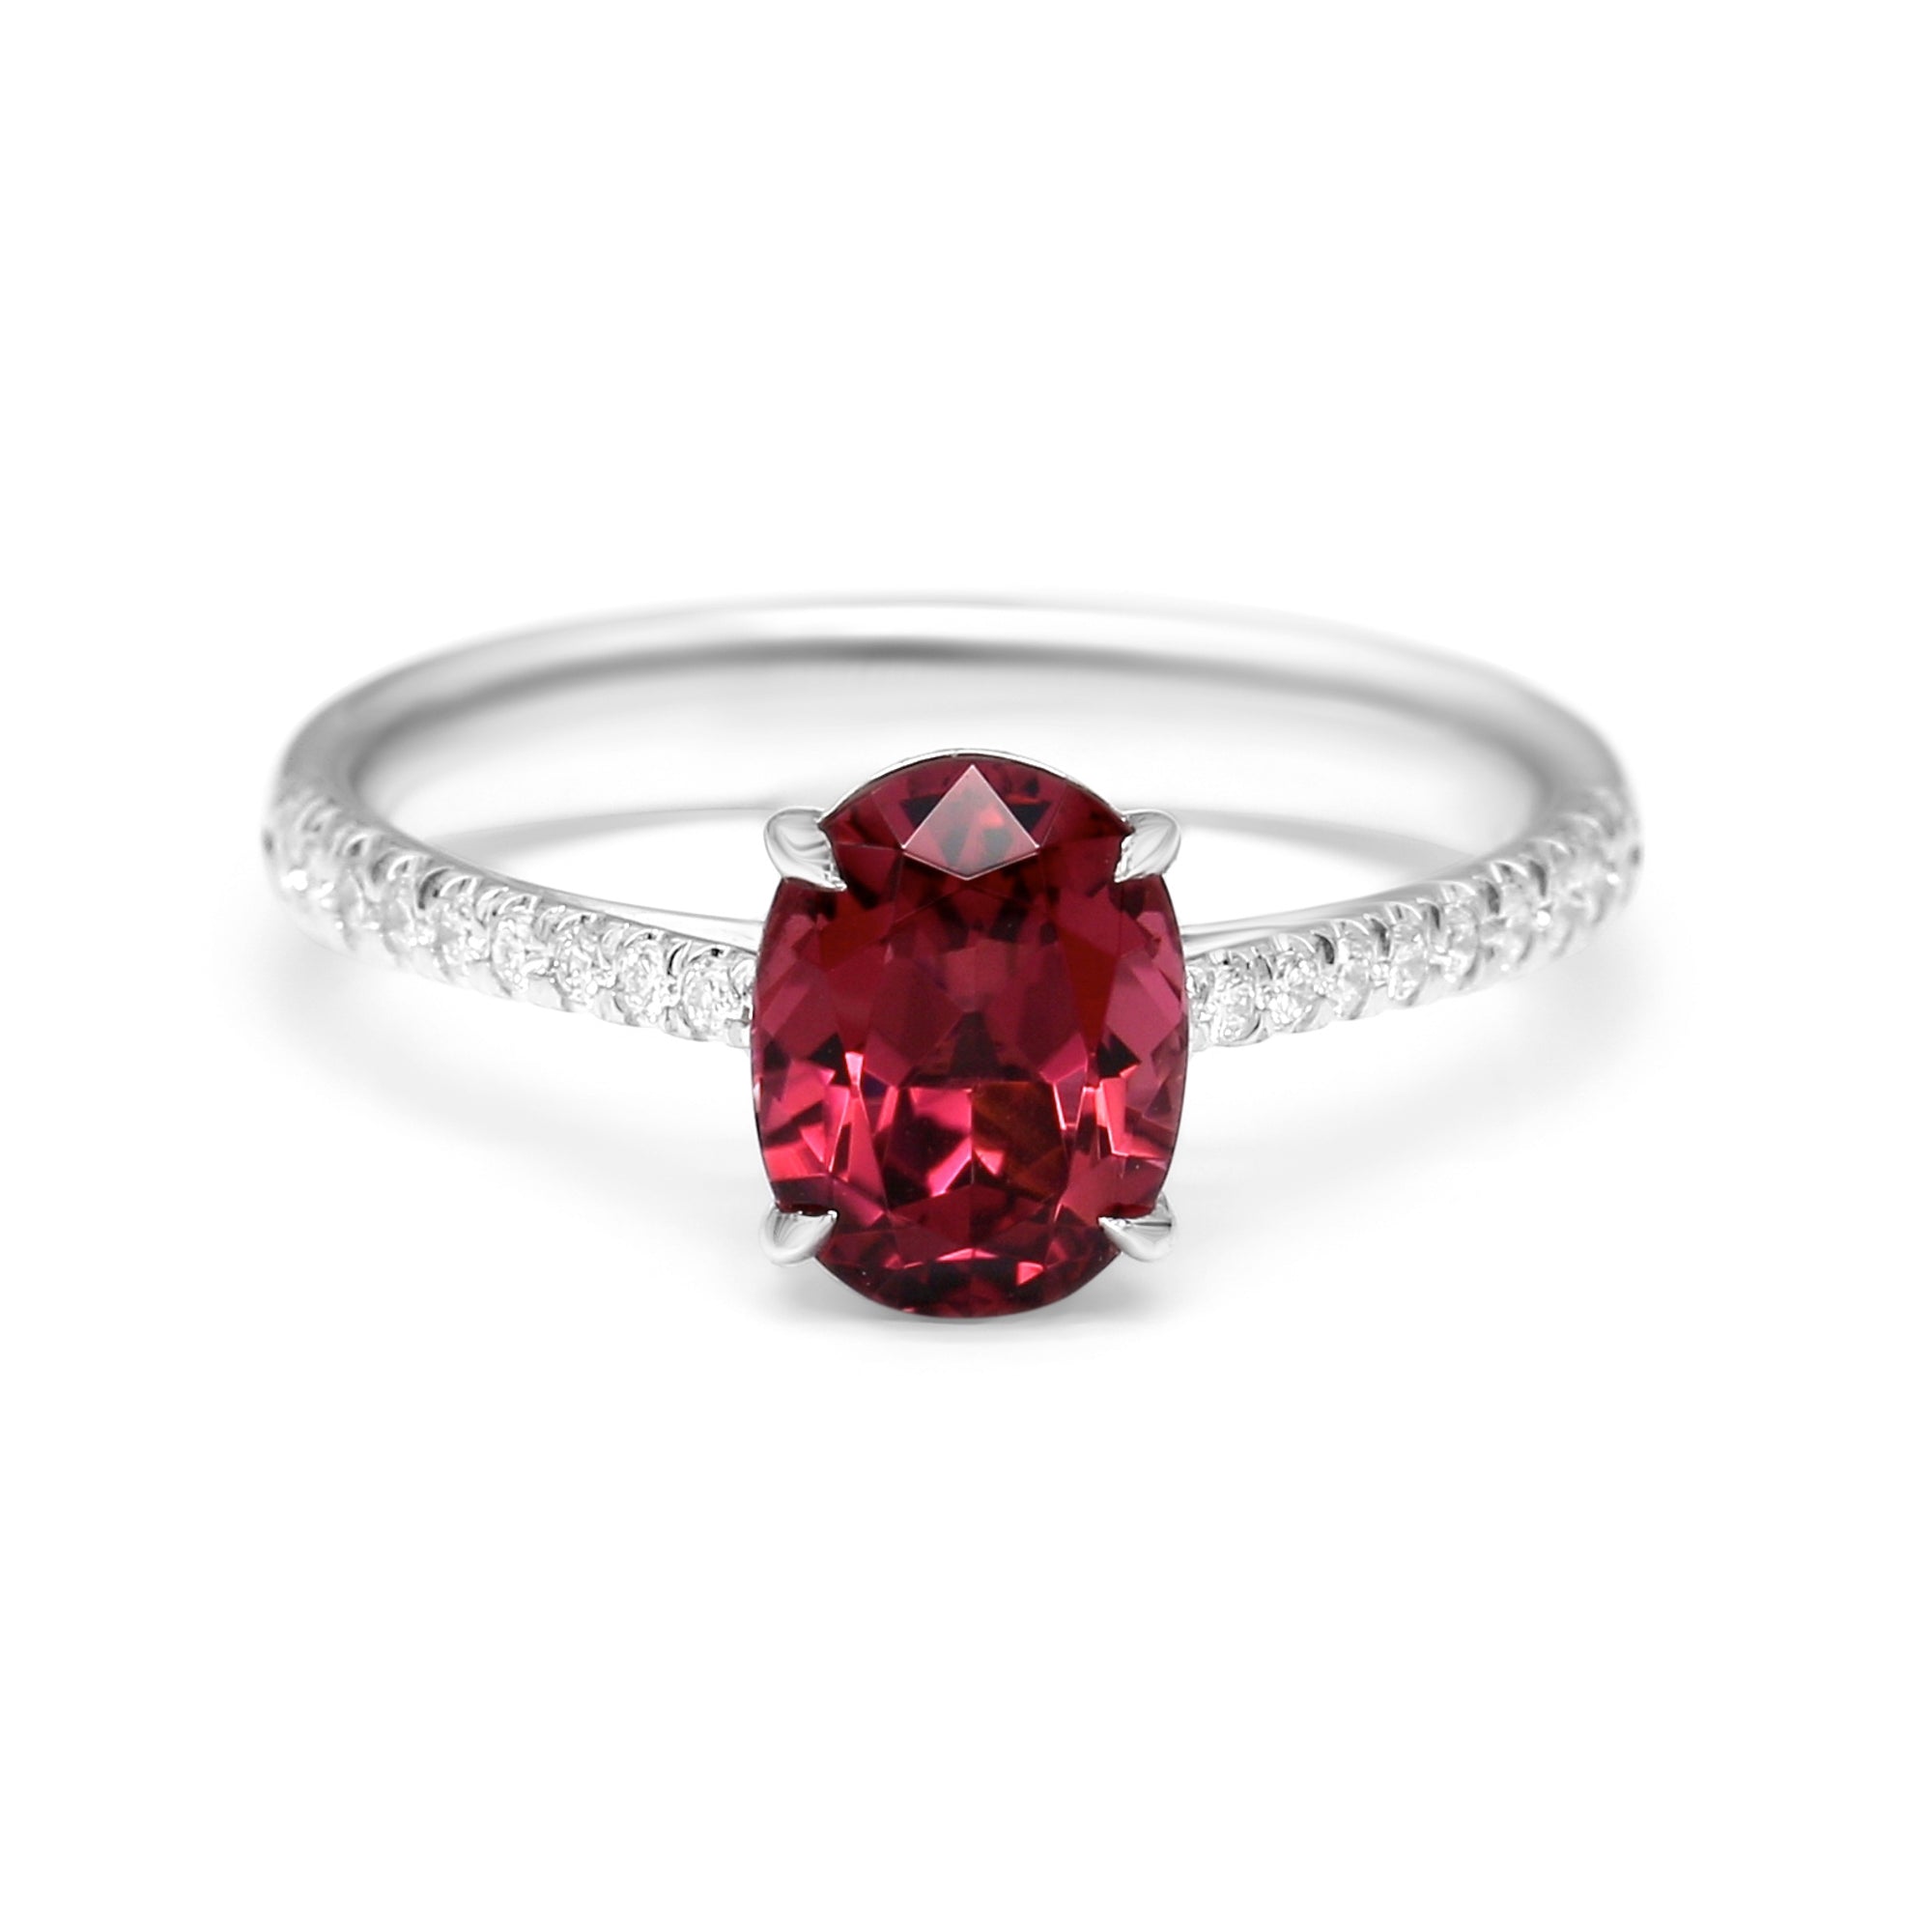 Rubellite Oval Ring with Diamonds - 1.79ct TW